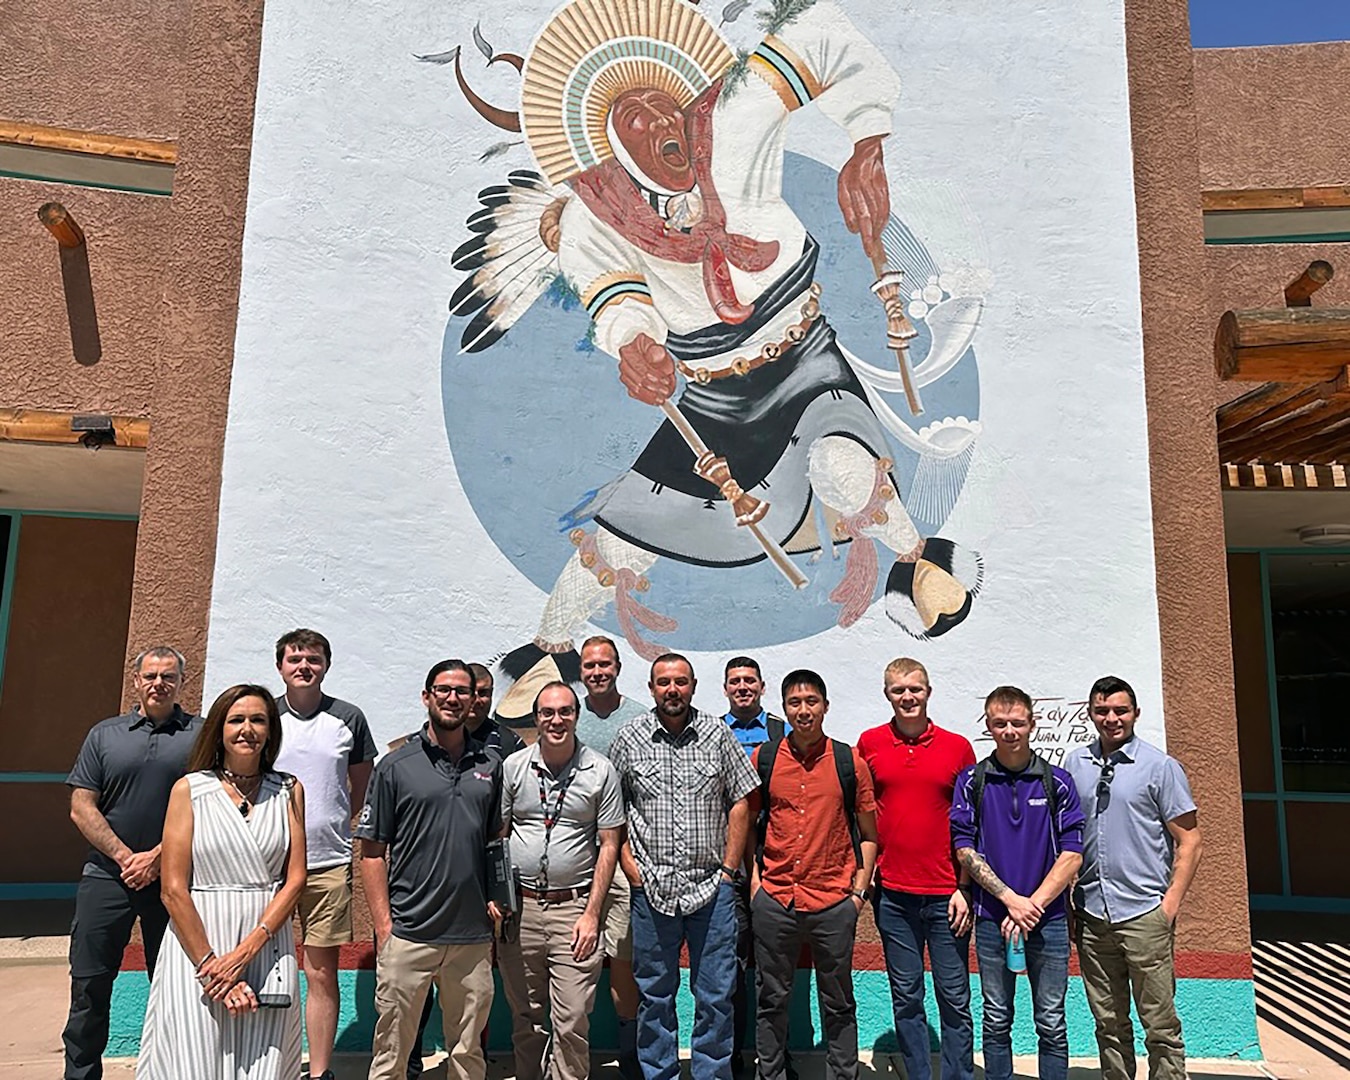 Members of the vulnerability assessment team and community staff pose for a group photo at the Indian Pueblo Cultural Community Center in Albuquerque, New Mexico on July 21, 2023. (Courtesy photo)